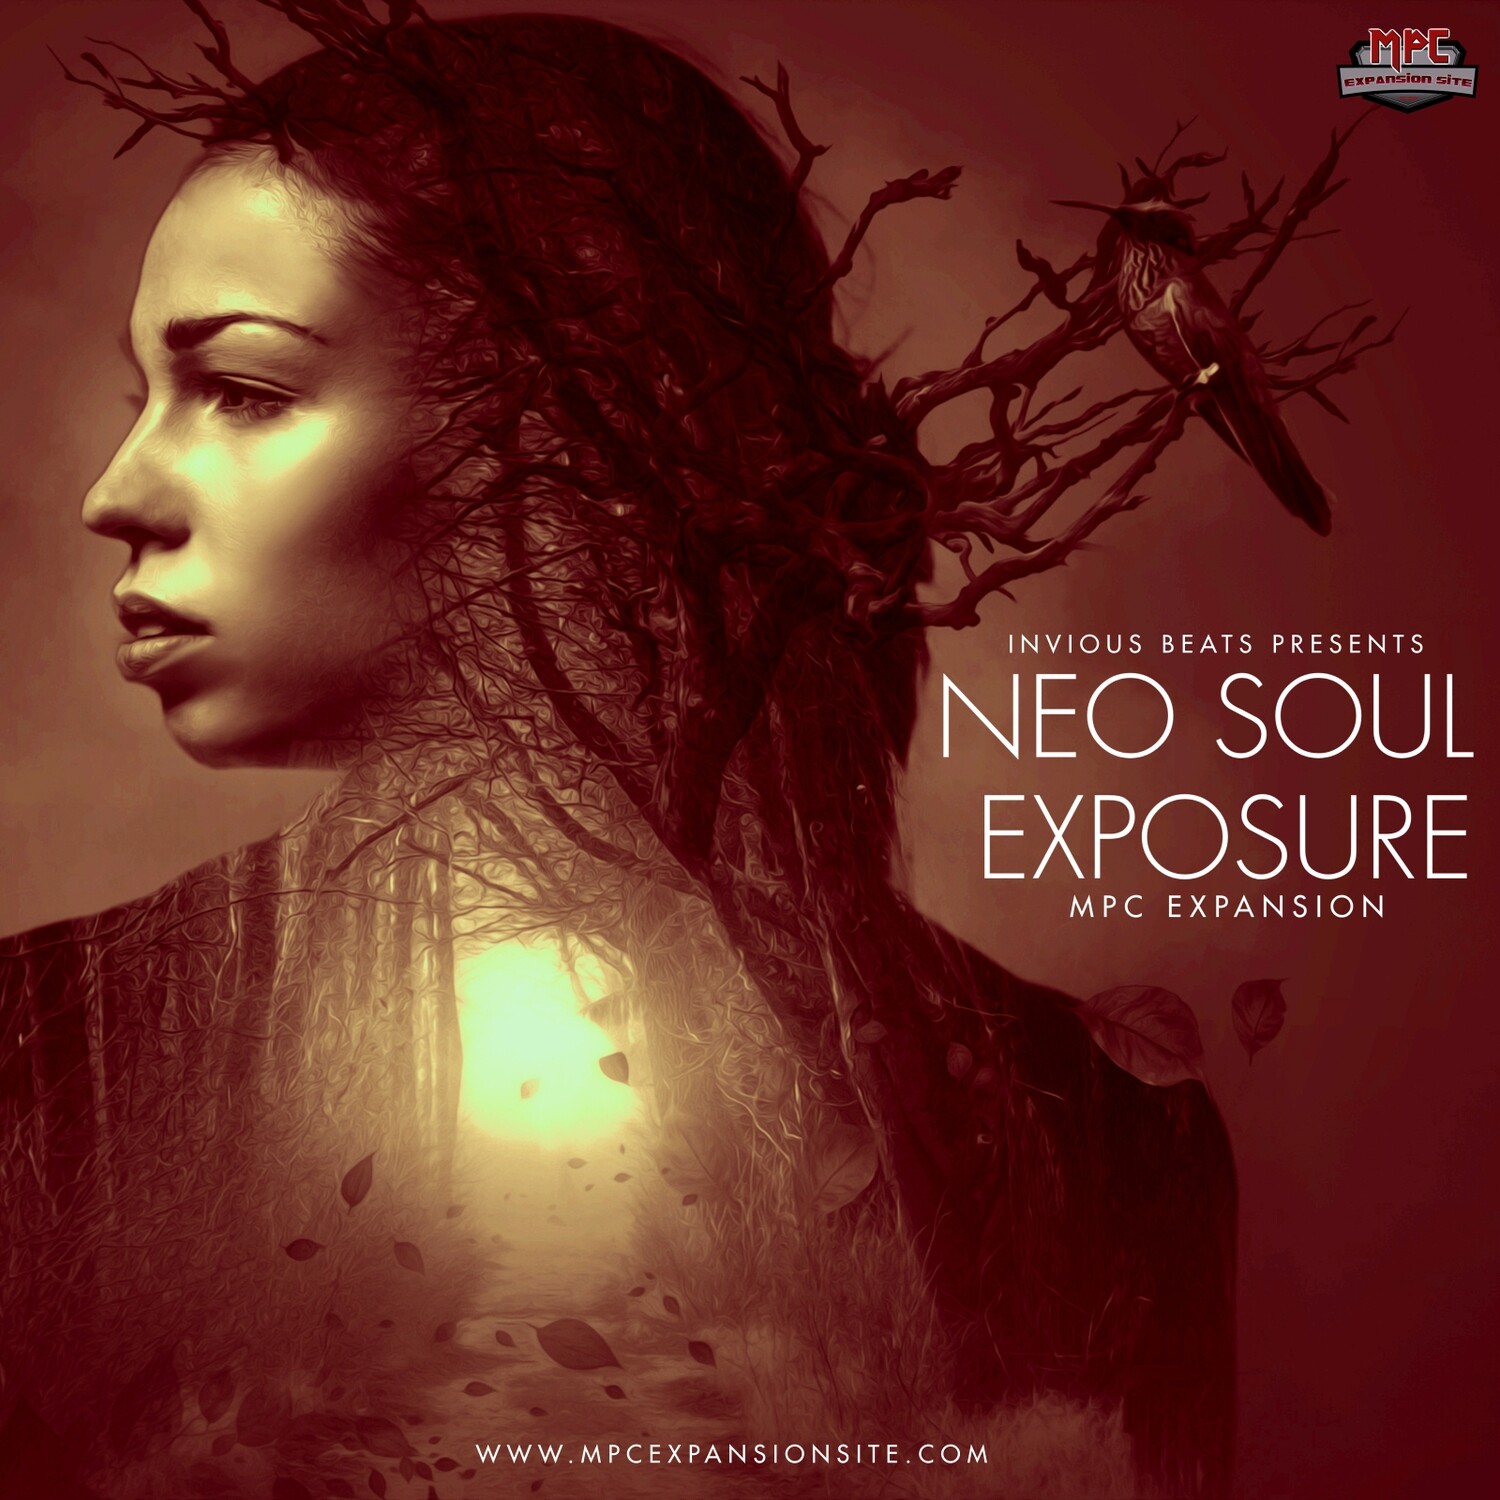 MPC EXPANSION 'NEO SOUL EXPOSURE' BY INVIOUS